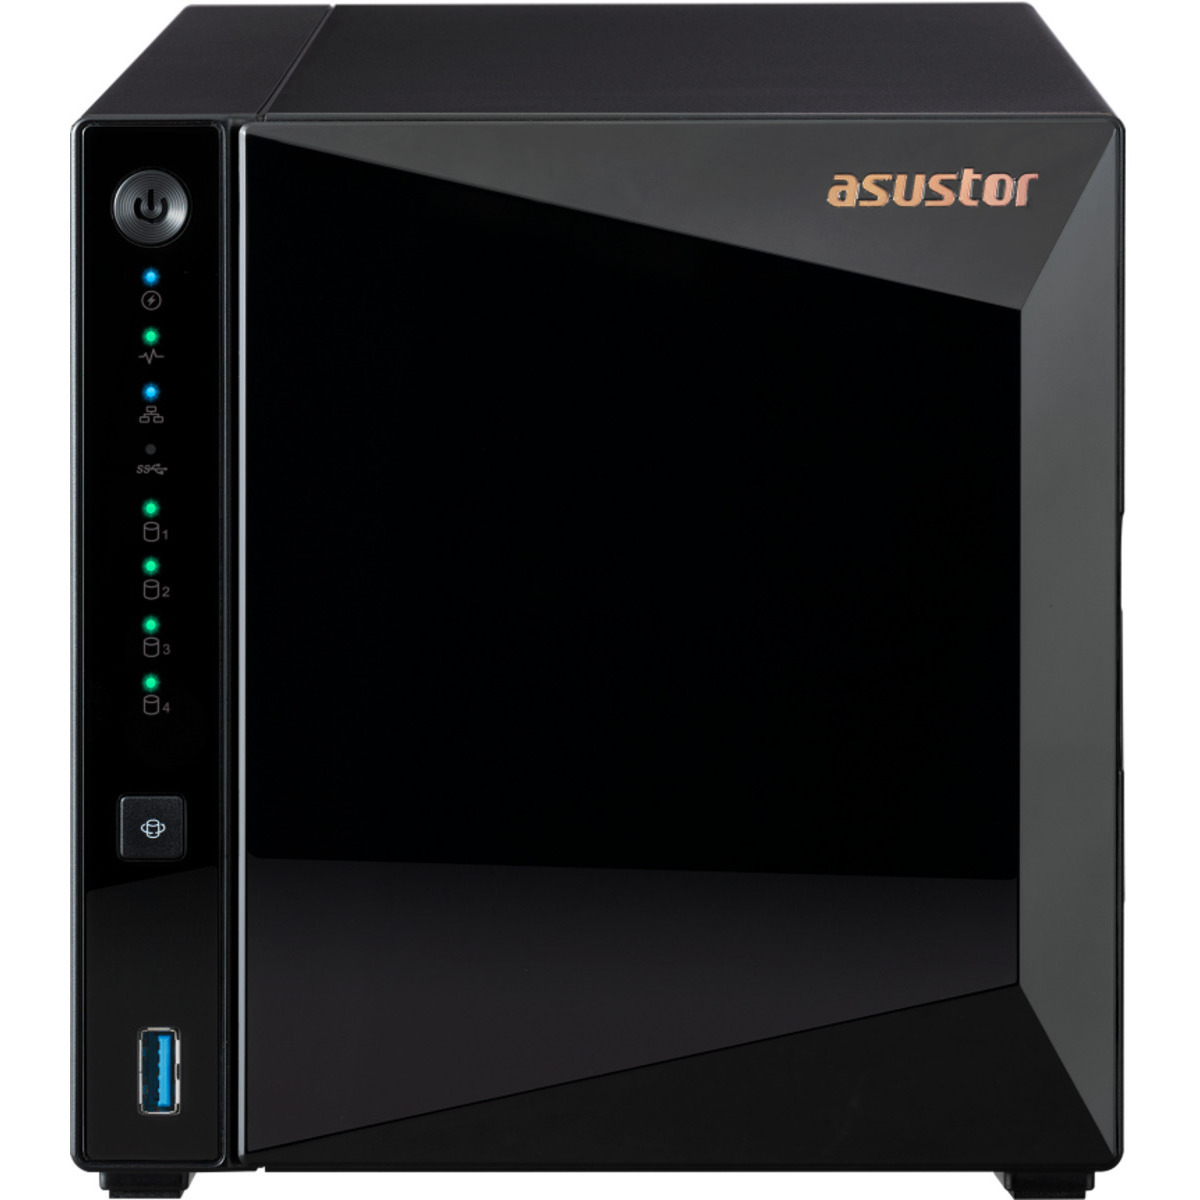 ASUSTOR DRIVESTOR 4 Pro Gen2 AS3304T v2 40tb 4-Bay Desktop Personal / Basic Home / Small Office NAS - Network Attached Storage Device 4x10tb Western Digital Red Plus WD101EFBX 3.5 7200rpm SATA 6Gb/s HDD NAS Class Drives Installed - Burn-In Tested - ON SALE DRIVESTOR 4 Pro Gen2 AS3304T v2